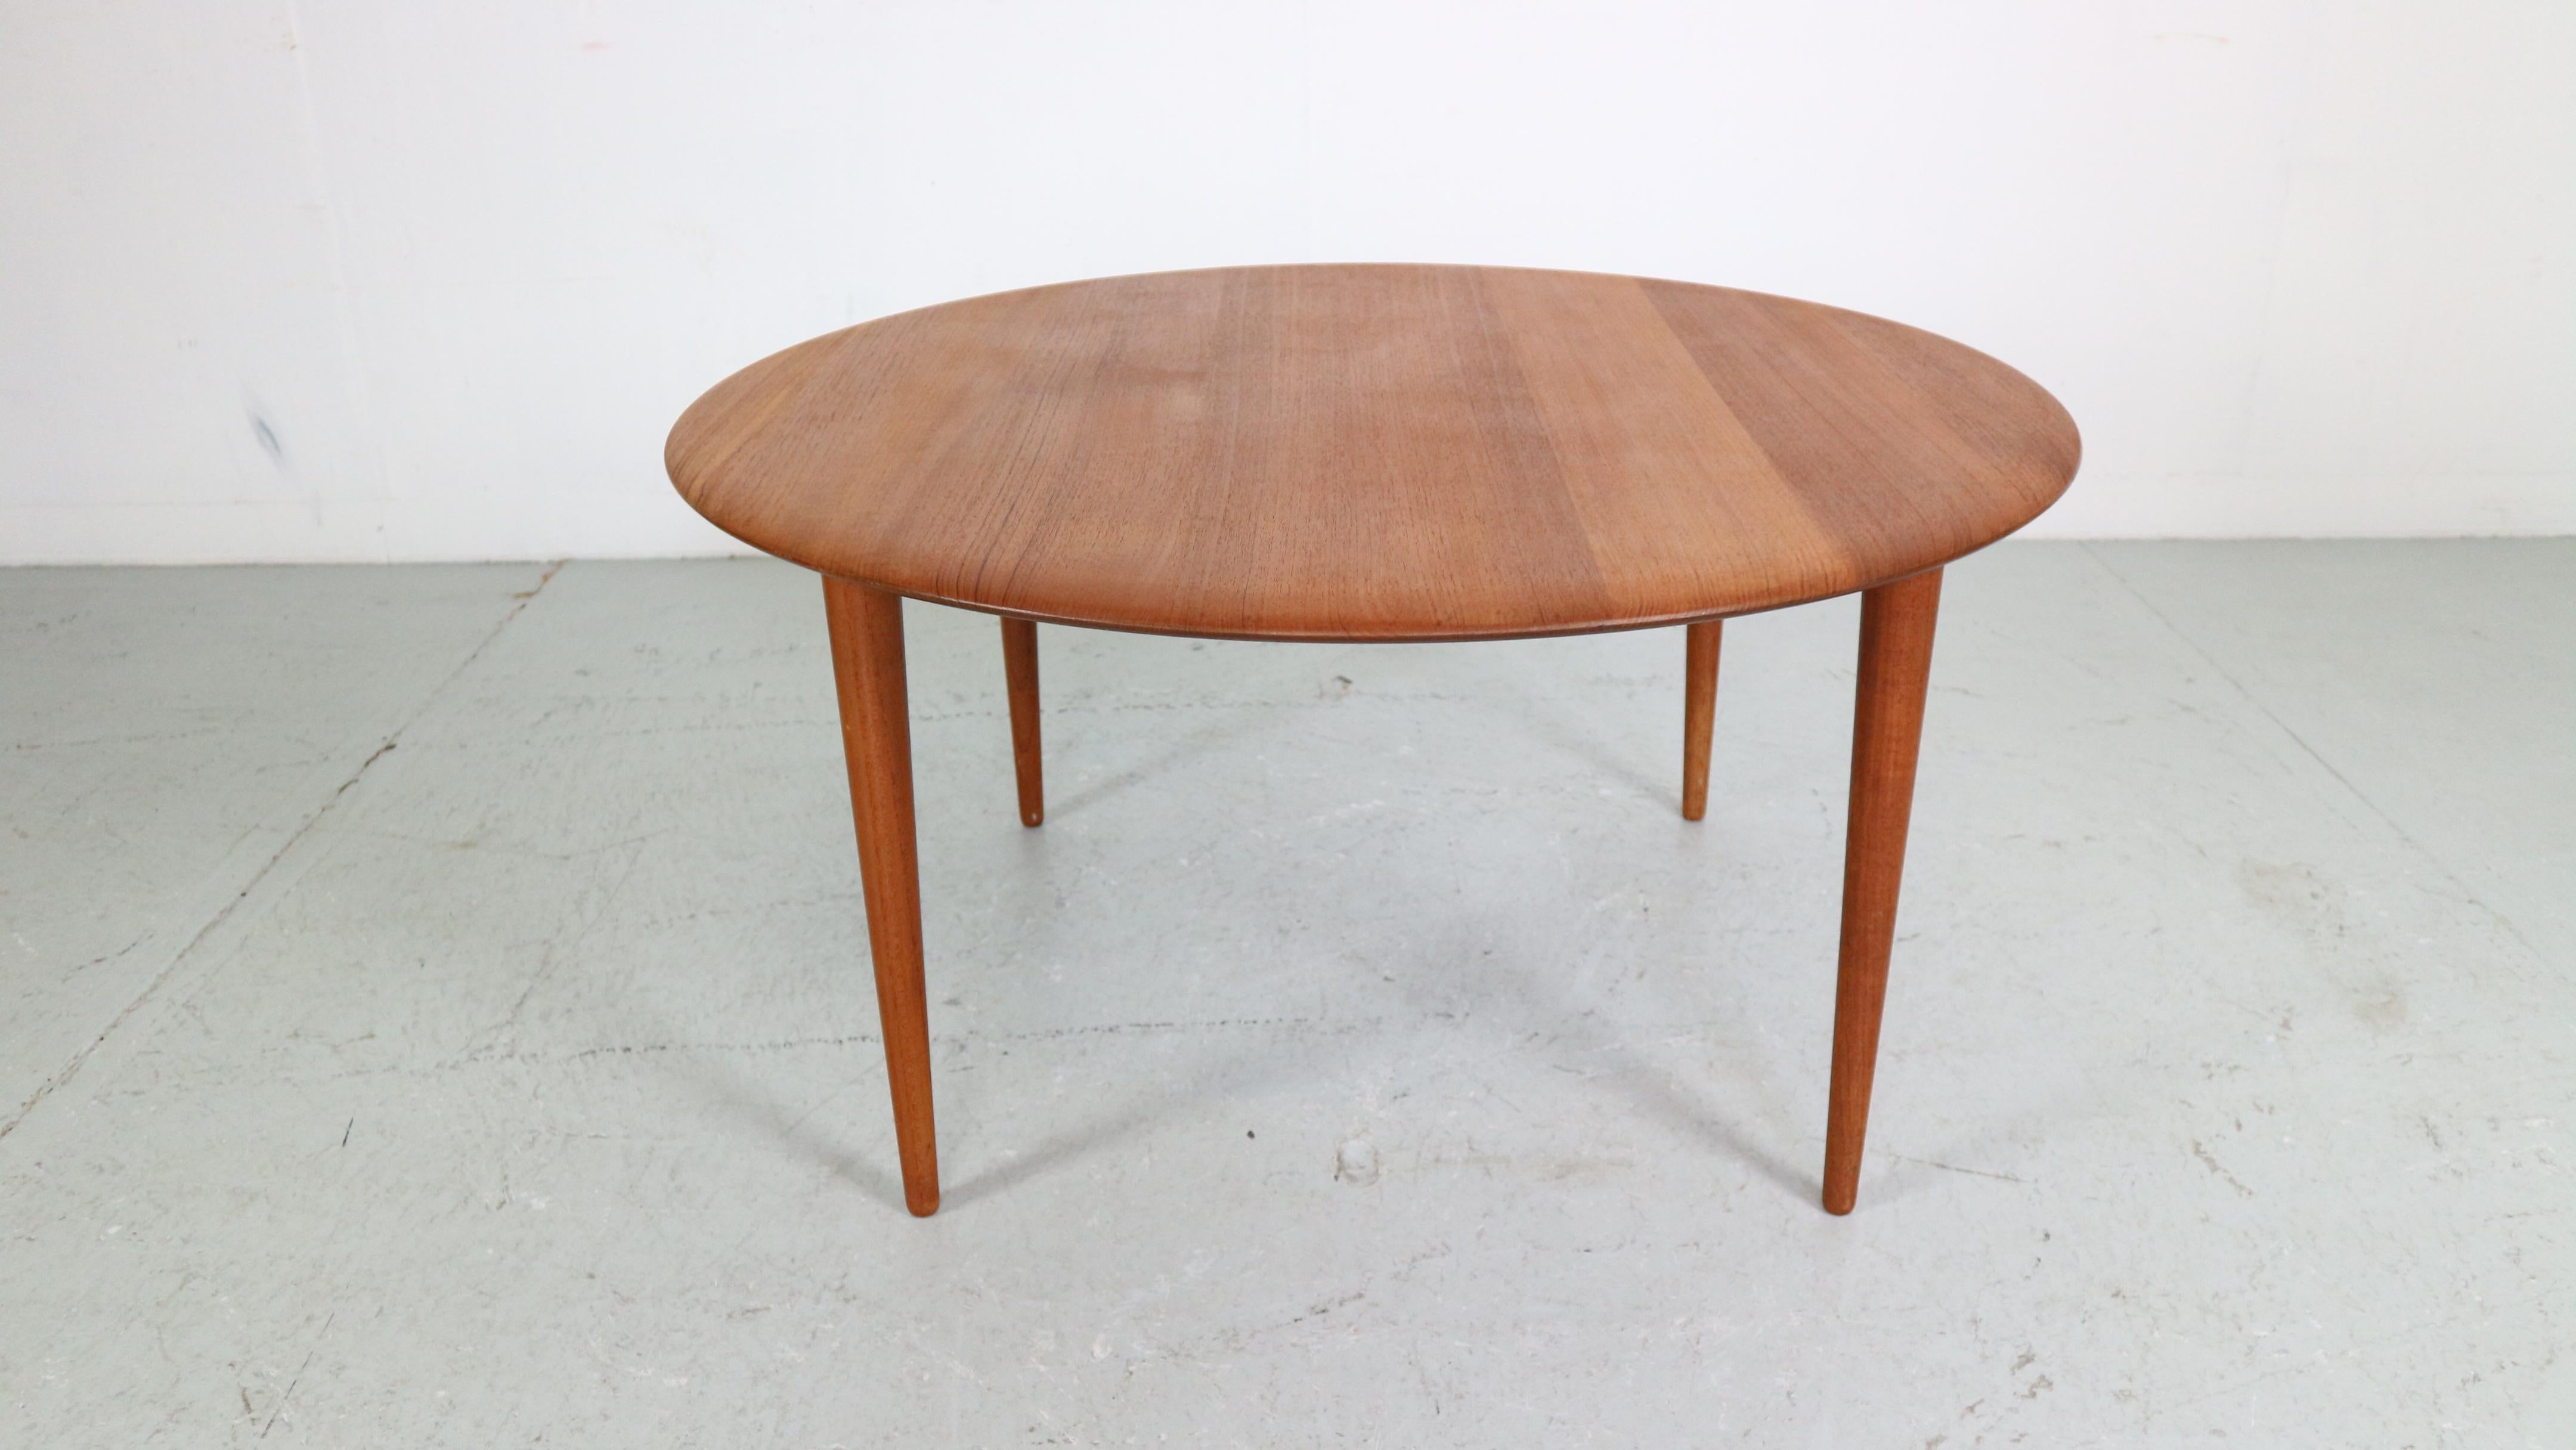 This round coffee table was designed by Peter Hvidt & Orla Mølgaard-Nielsen and was produced by France & Søn in 1950s, Denmark.
This circular table is made out of solid teak wood and features the typically Danish simplicity in design. A simple yet